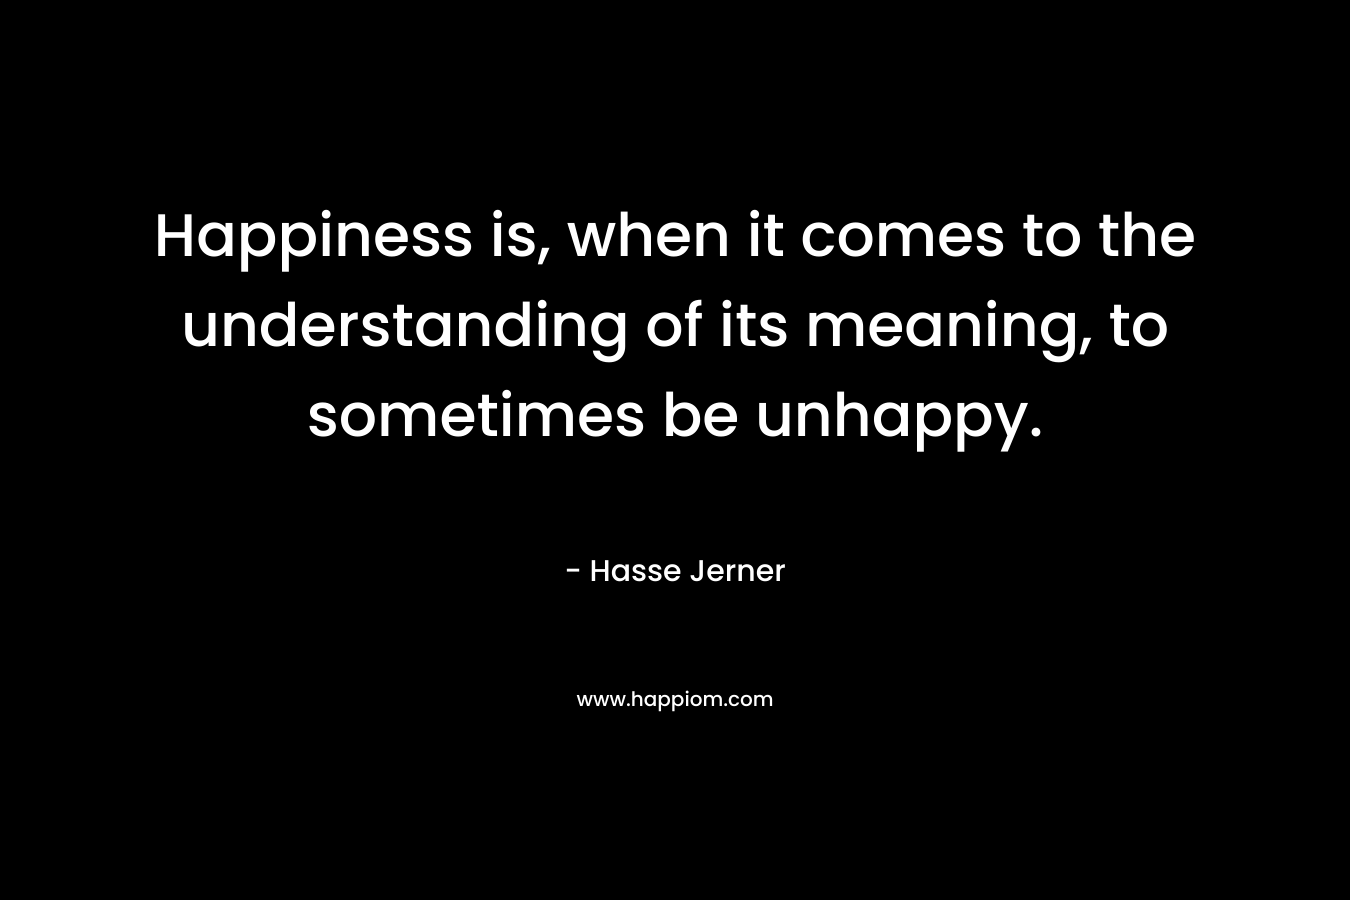 Happiness is, when it comes to the understanding of its meaning, to sometimes be unhappy. – Hasse Jerner